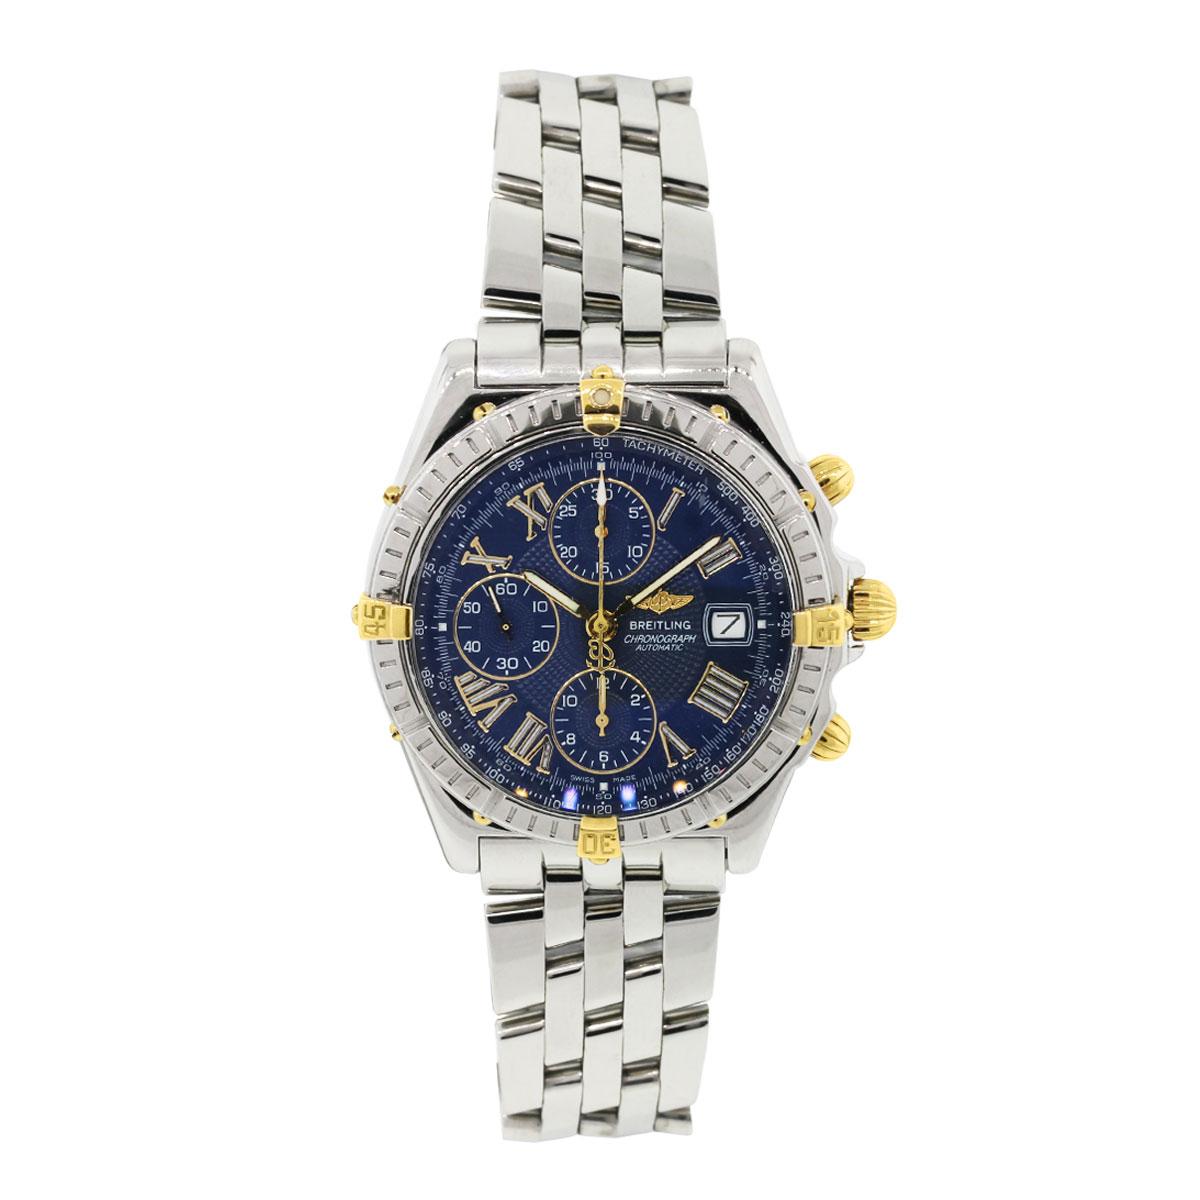 Brand: Breitling
MPN: B13055
Model: Crosswind
Case Material: Stainless steel
Case Diameter: 43mm
Crystal: Sapphire
Bezel: Stainless steel unidirectional bezel with gold markers at the 12 o’clock, 3 o’clock, 6 o’clock, and 9 o’clock position
Dial: